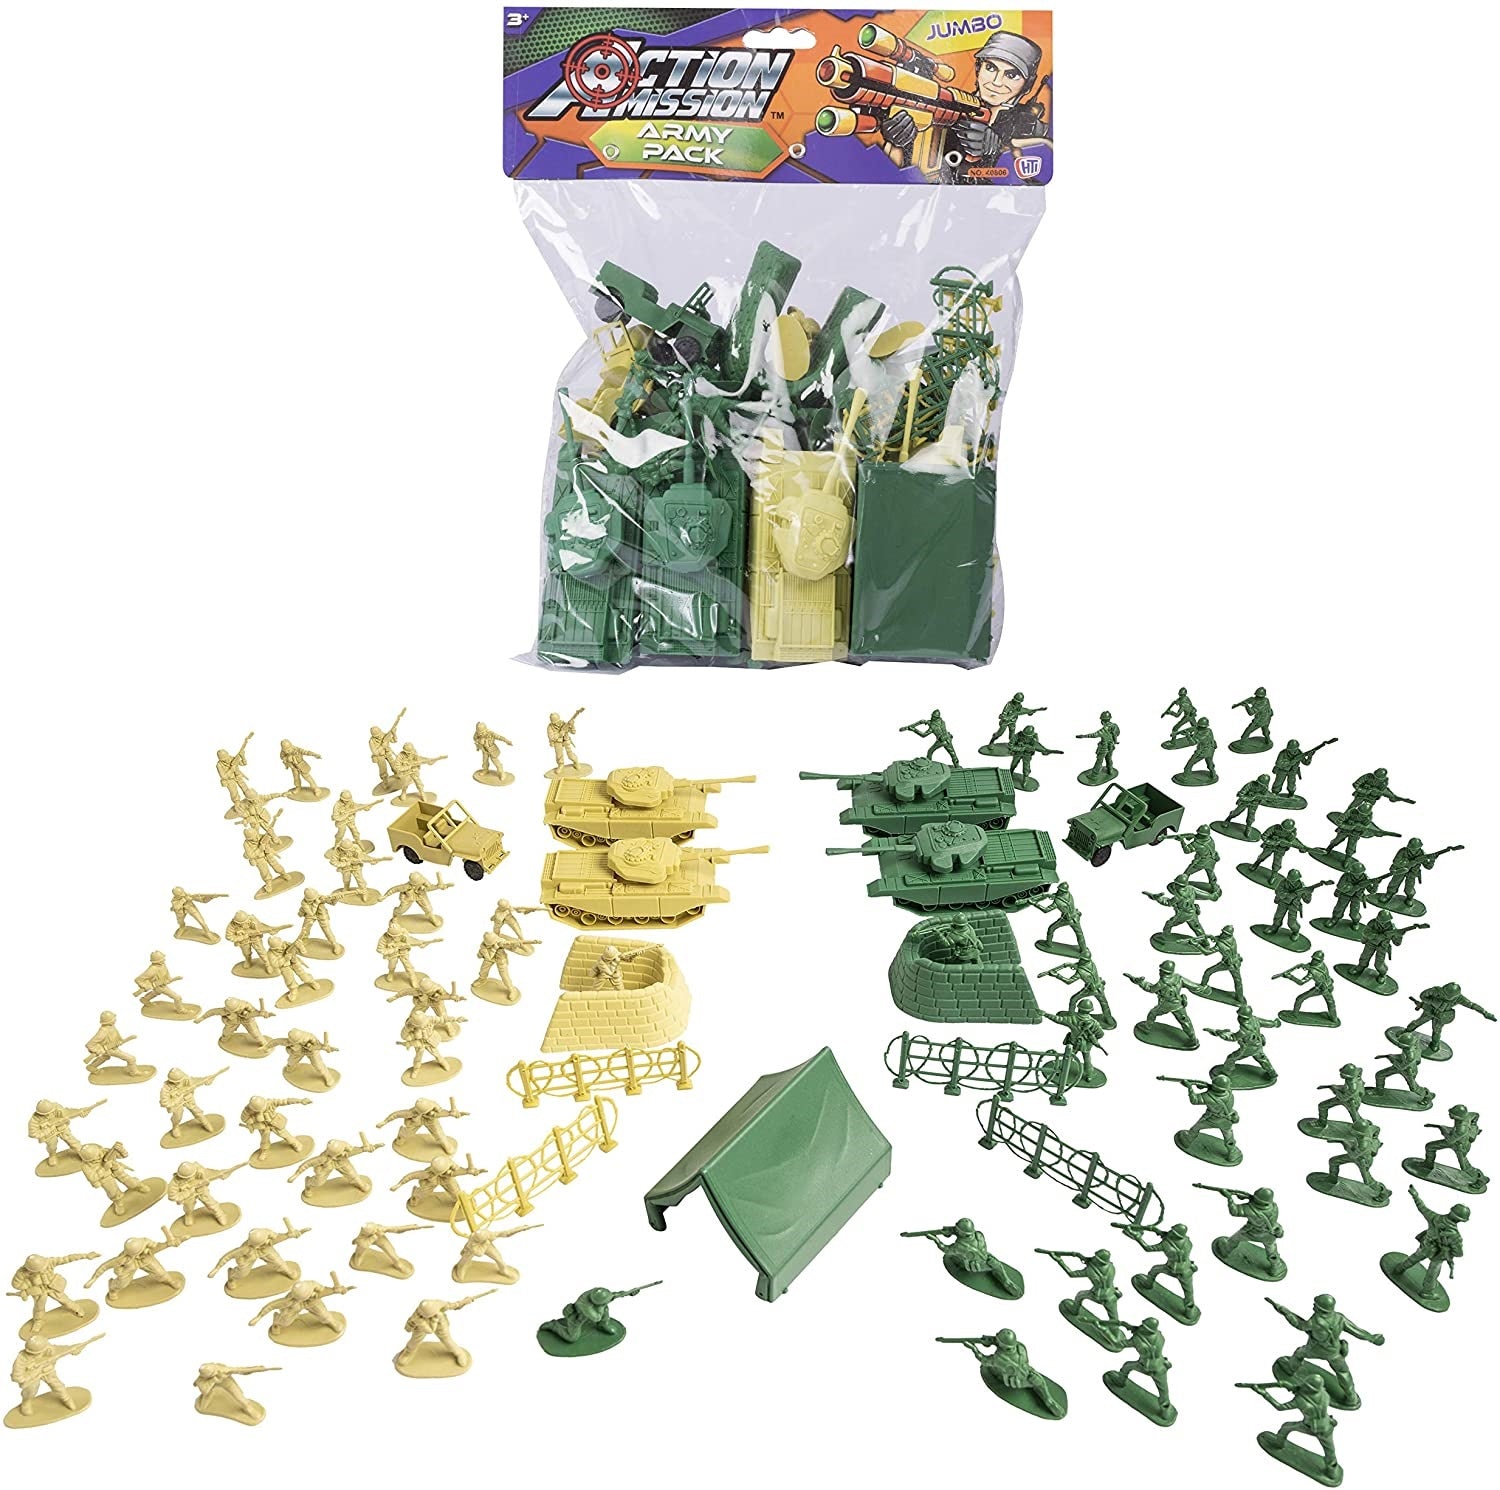 HTI Action Mission Jumbo Army Pack